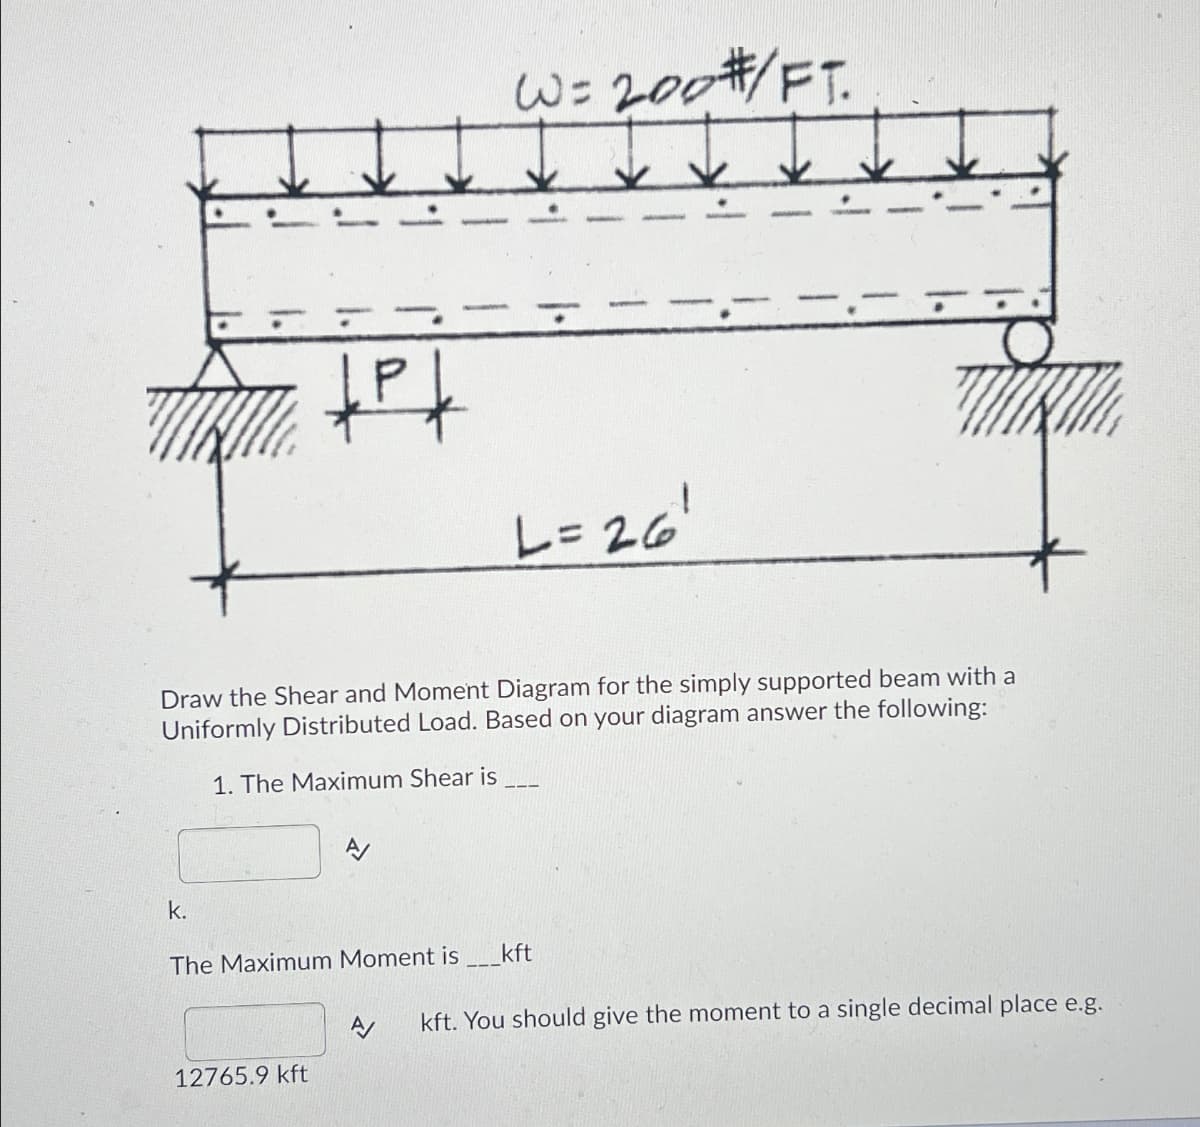 k.
+P+
Draw the Shear and Moment Diagram for the simply supported beam with a
Uniformly Distributed Load. Based on your diagram answer the following:
1. The Maximum Shear is
12765.9 kft
W= 200 #/FT.
A/
L=26¹
The Maximum Moment is _____kft
A/ kft. You should give the moment to a single decimal place e.g.